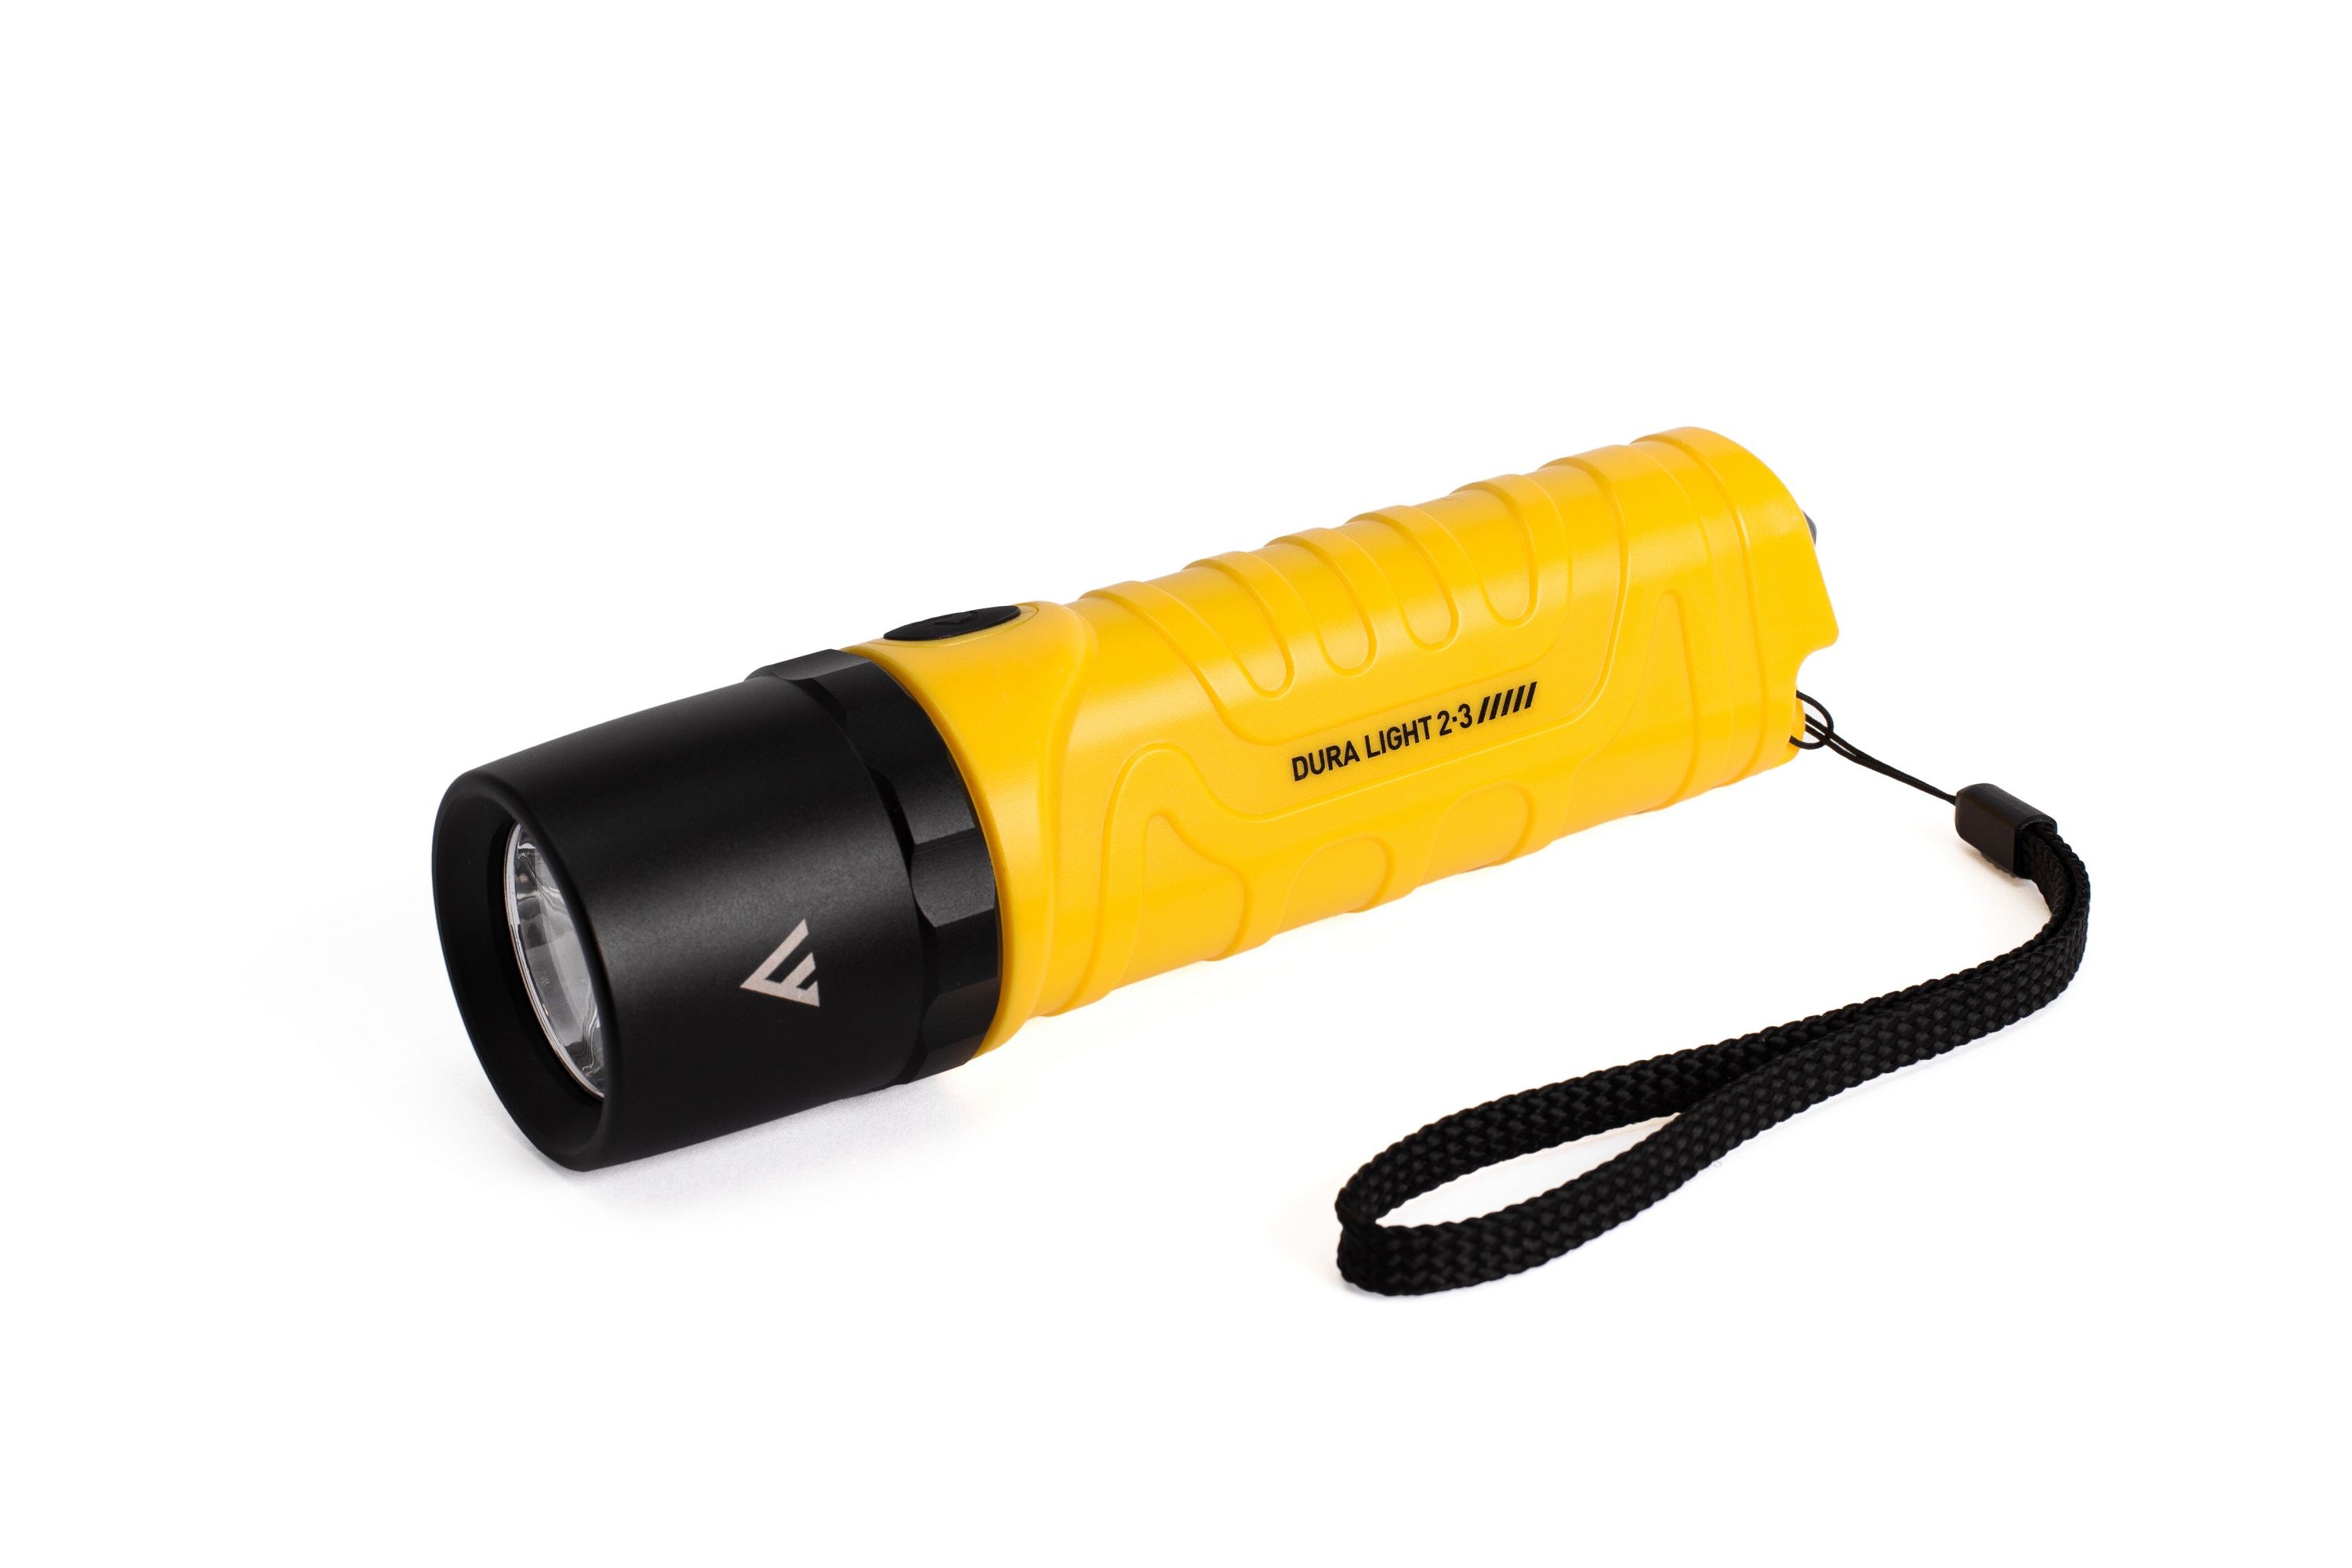 LED Rechargeable Flashlight with Powerbank Function DURA LIGHT 2.3, 700 lm